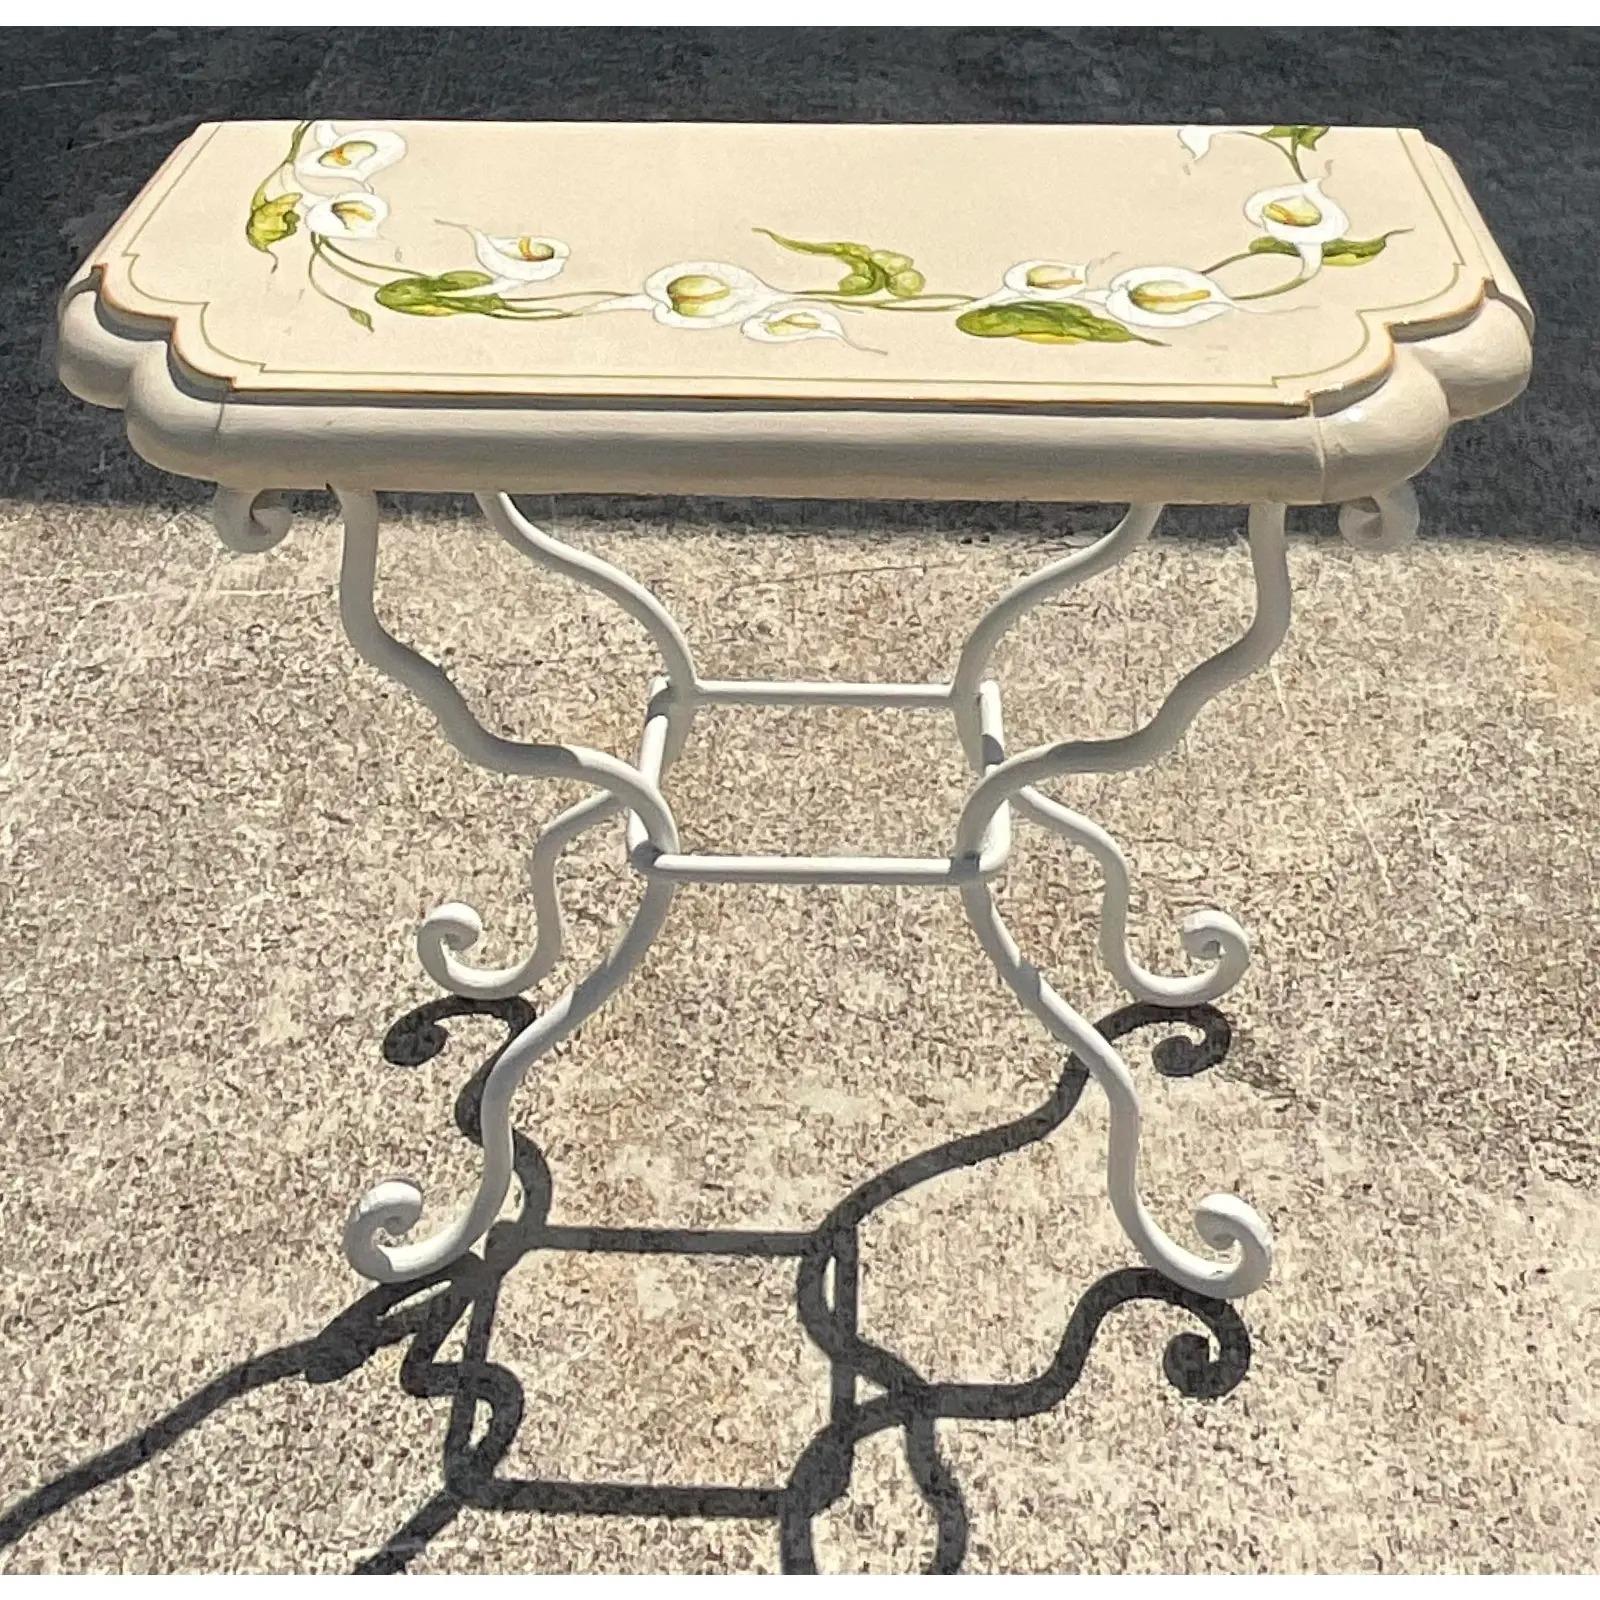 Fantastic vintage Coastal console table. Beautiful glazed terracotta top on a wrought iron base. Beautiful ring of hand painted lilies. Acquired from a Palm Beach estate.